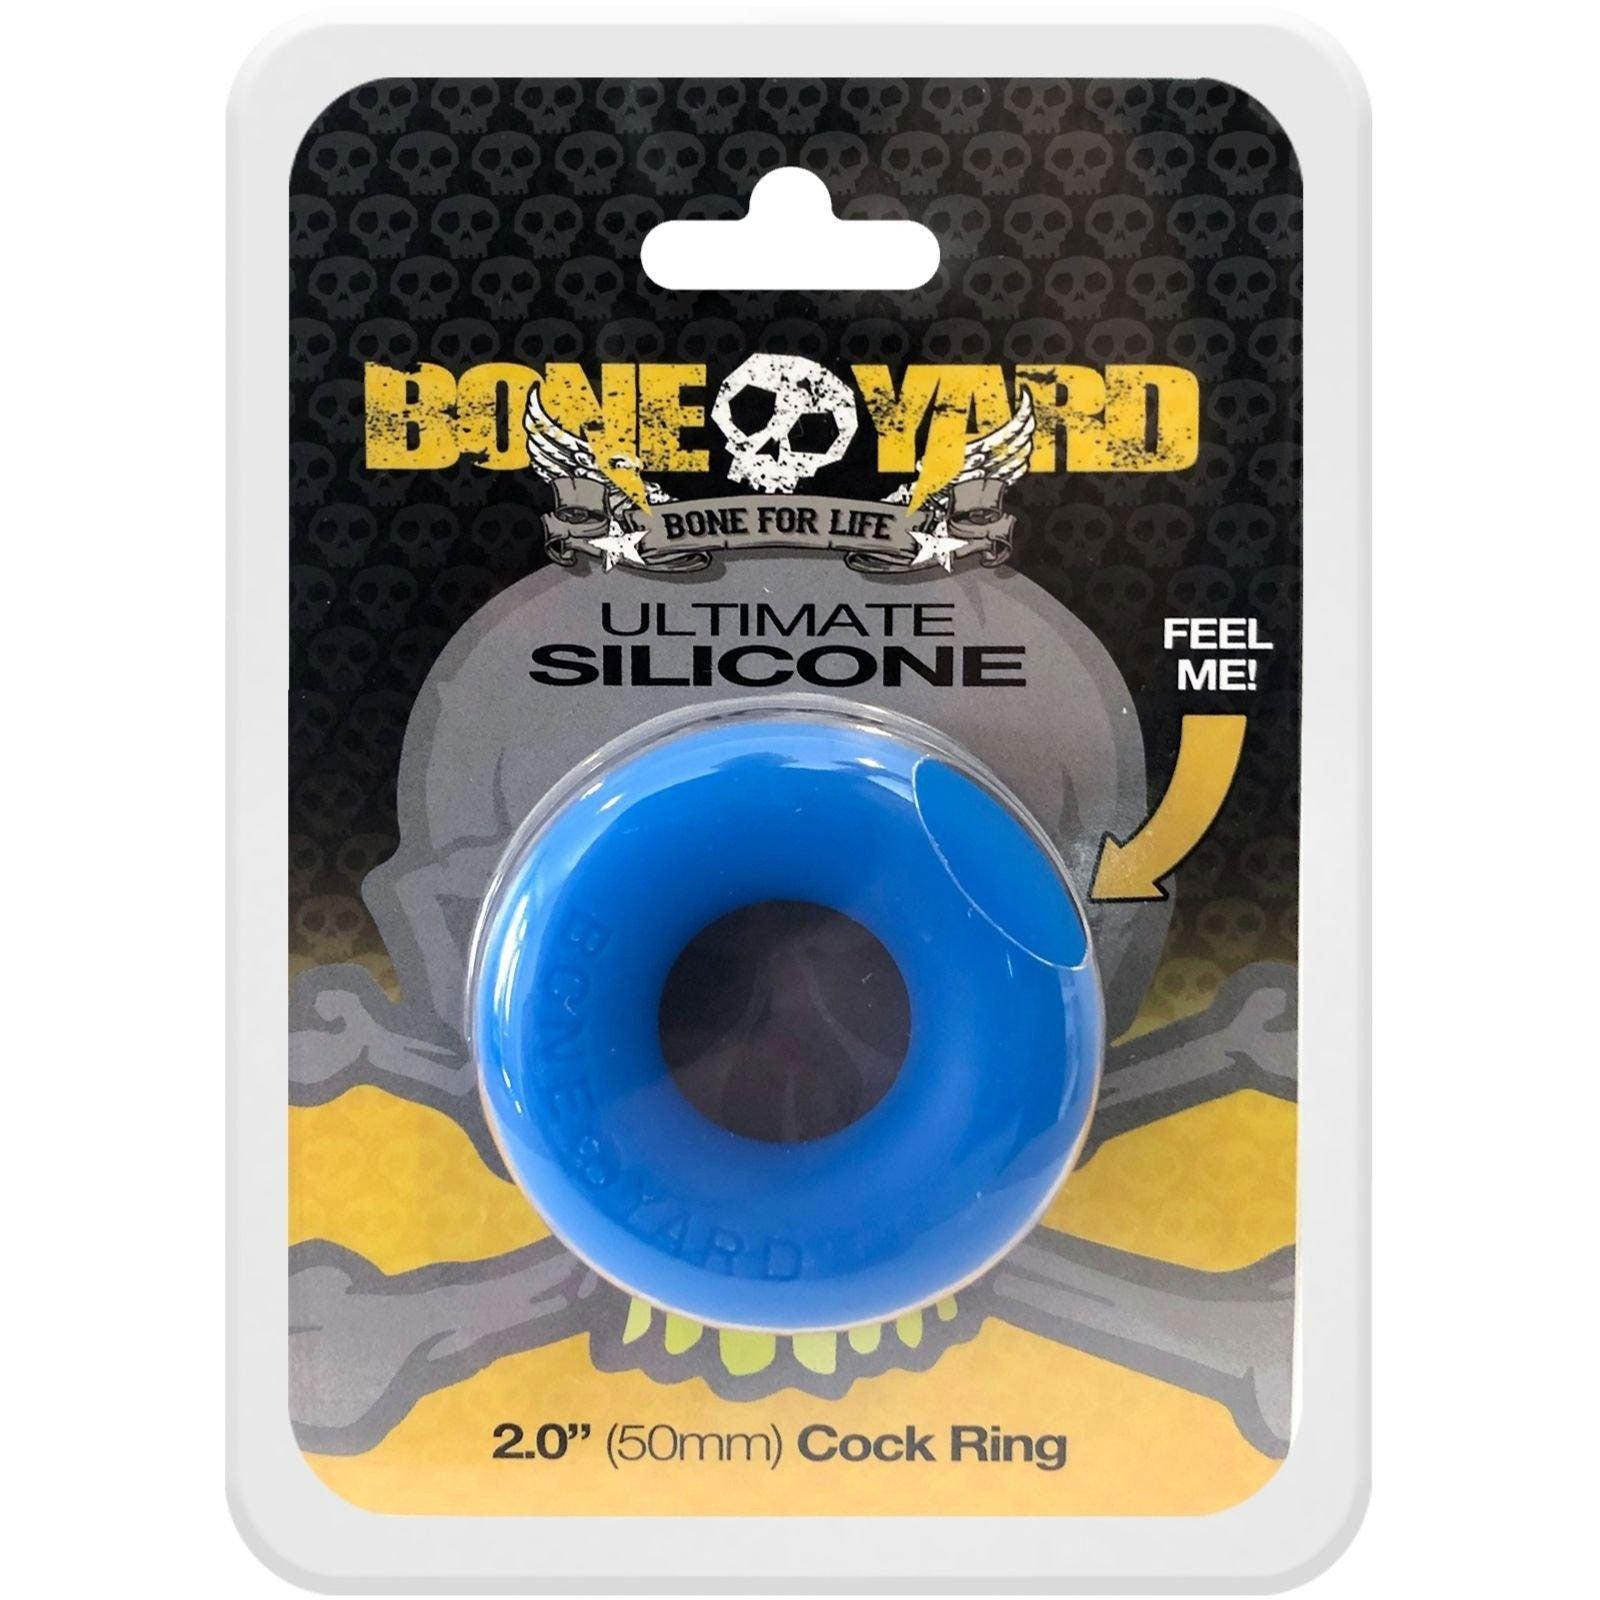 Ultimate Silicone Cock Ring - Blue